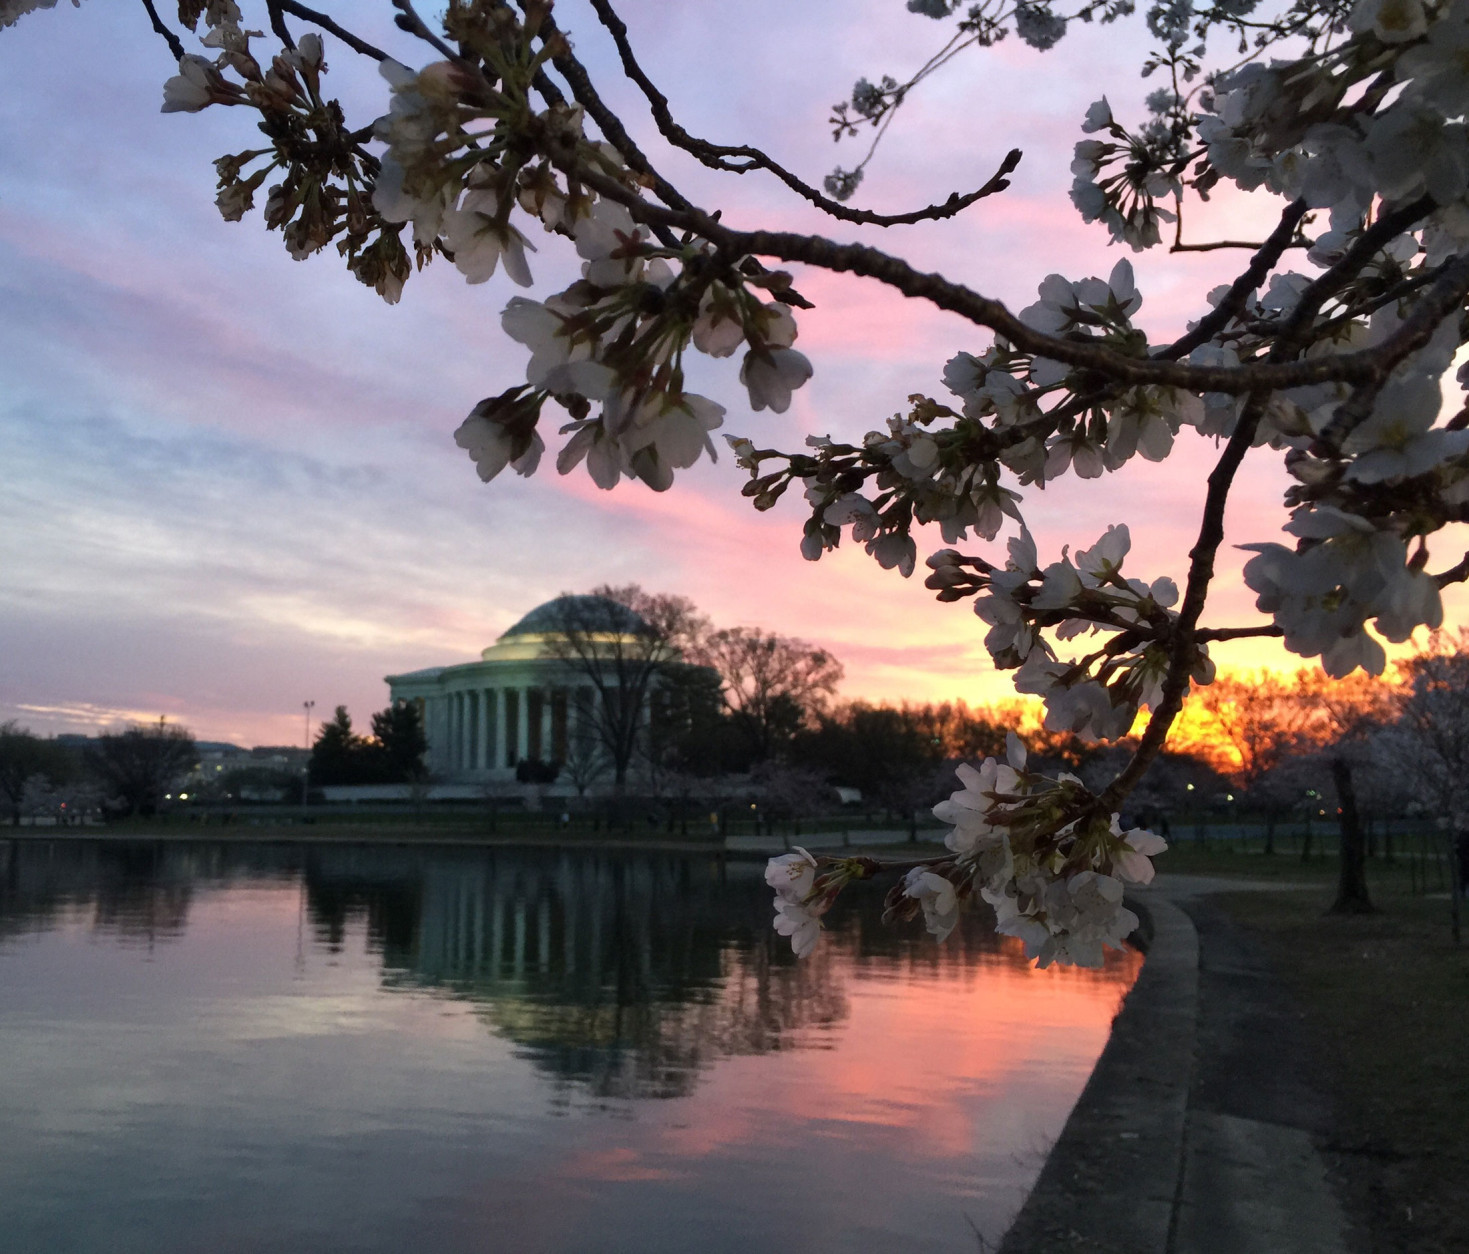 The cherry blossoms at sunrise. (Joy Waltzer Price)